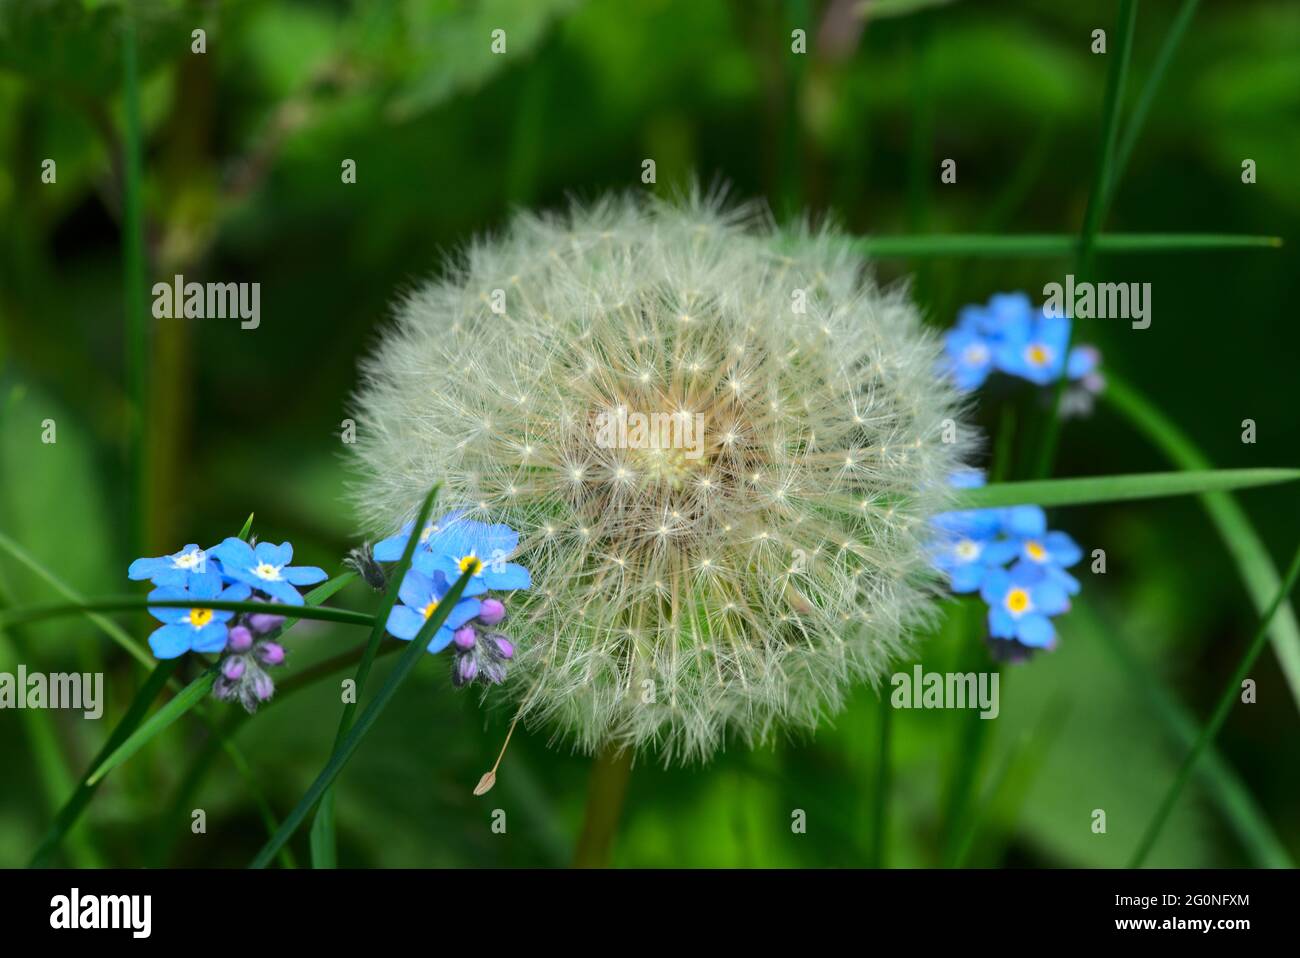 Dandelion ball and small blue forget-me-not flowers in spring Stock Photo